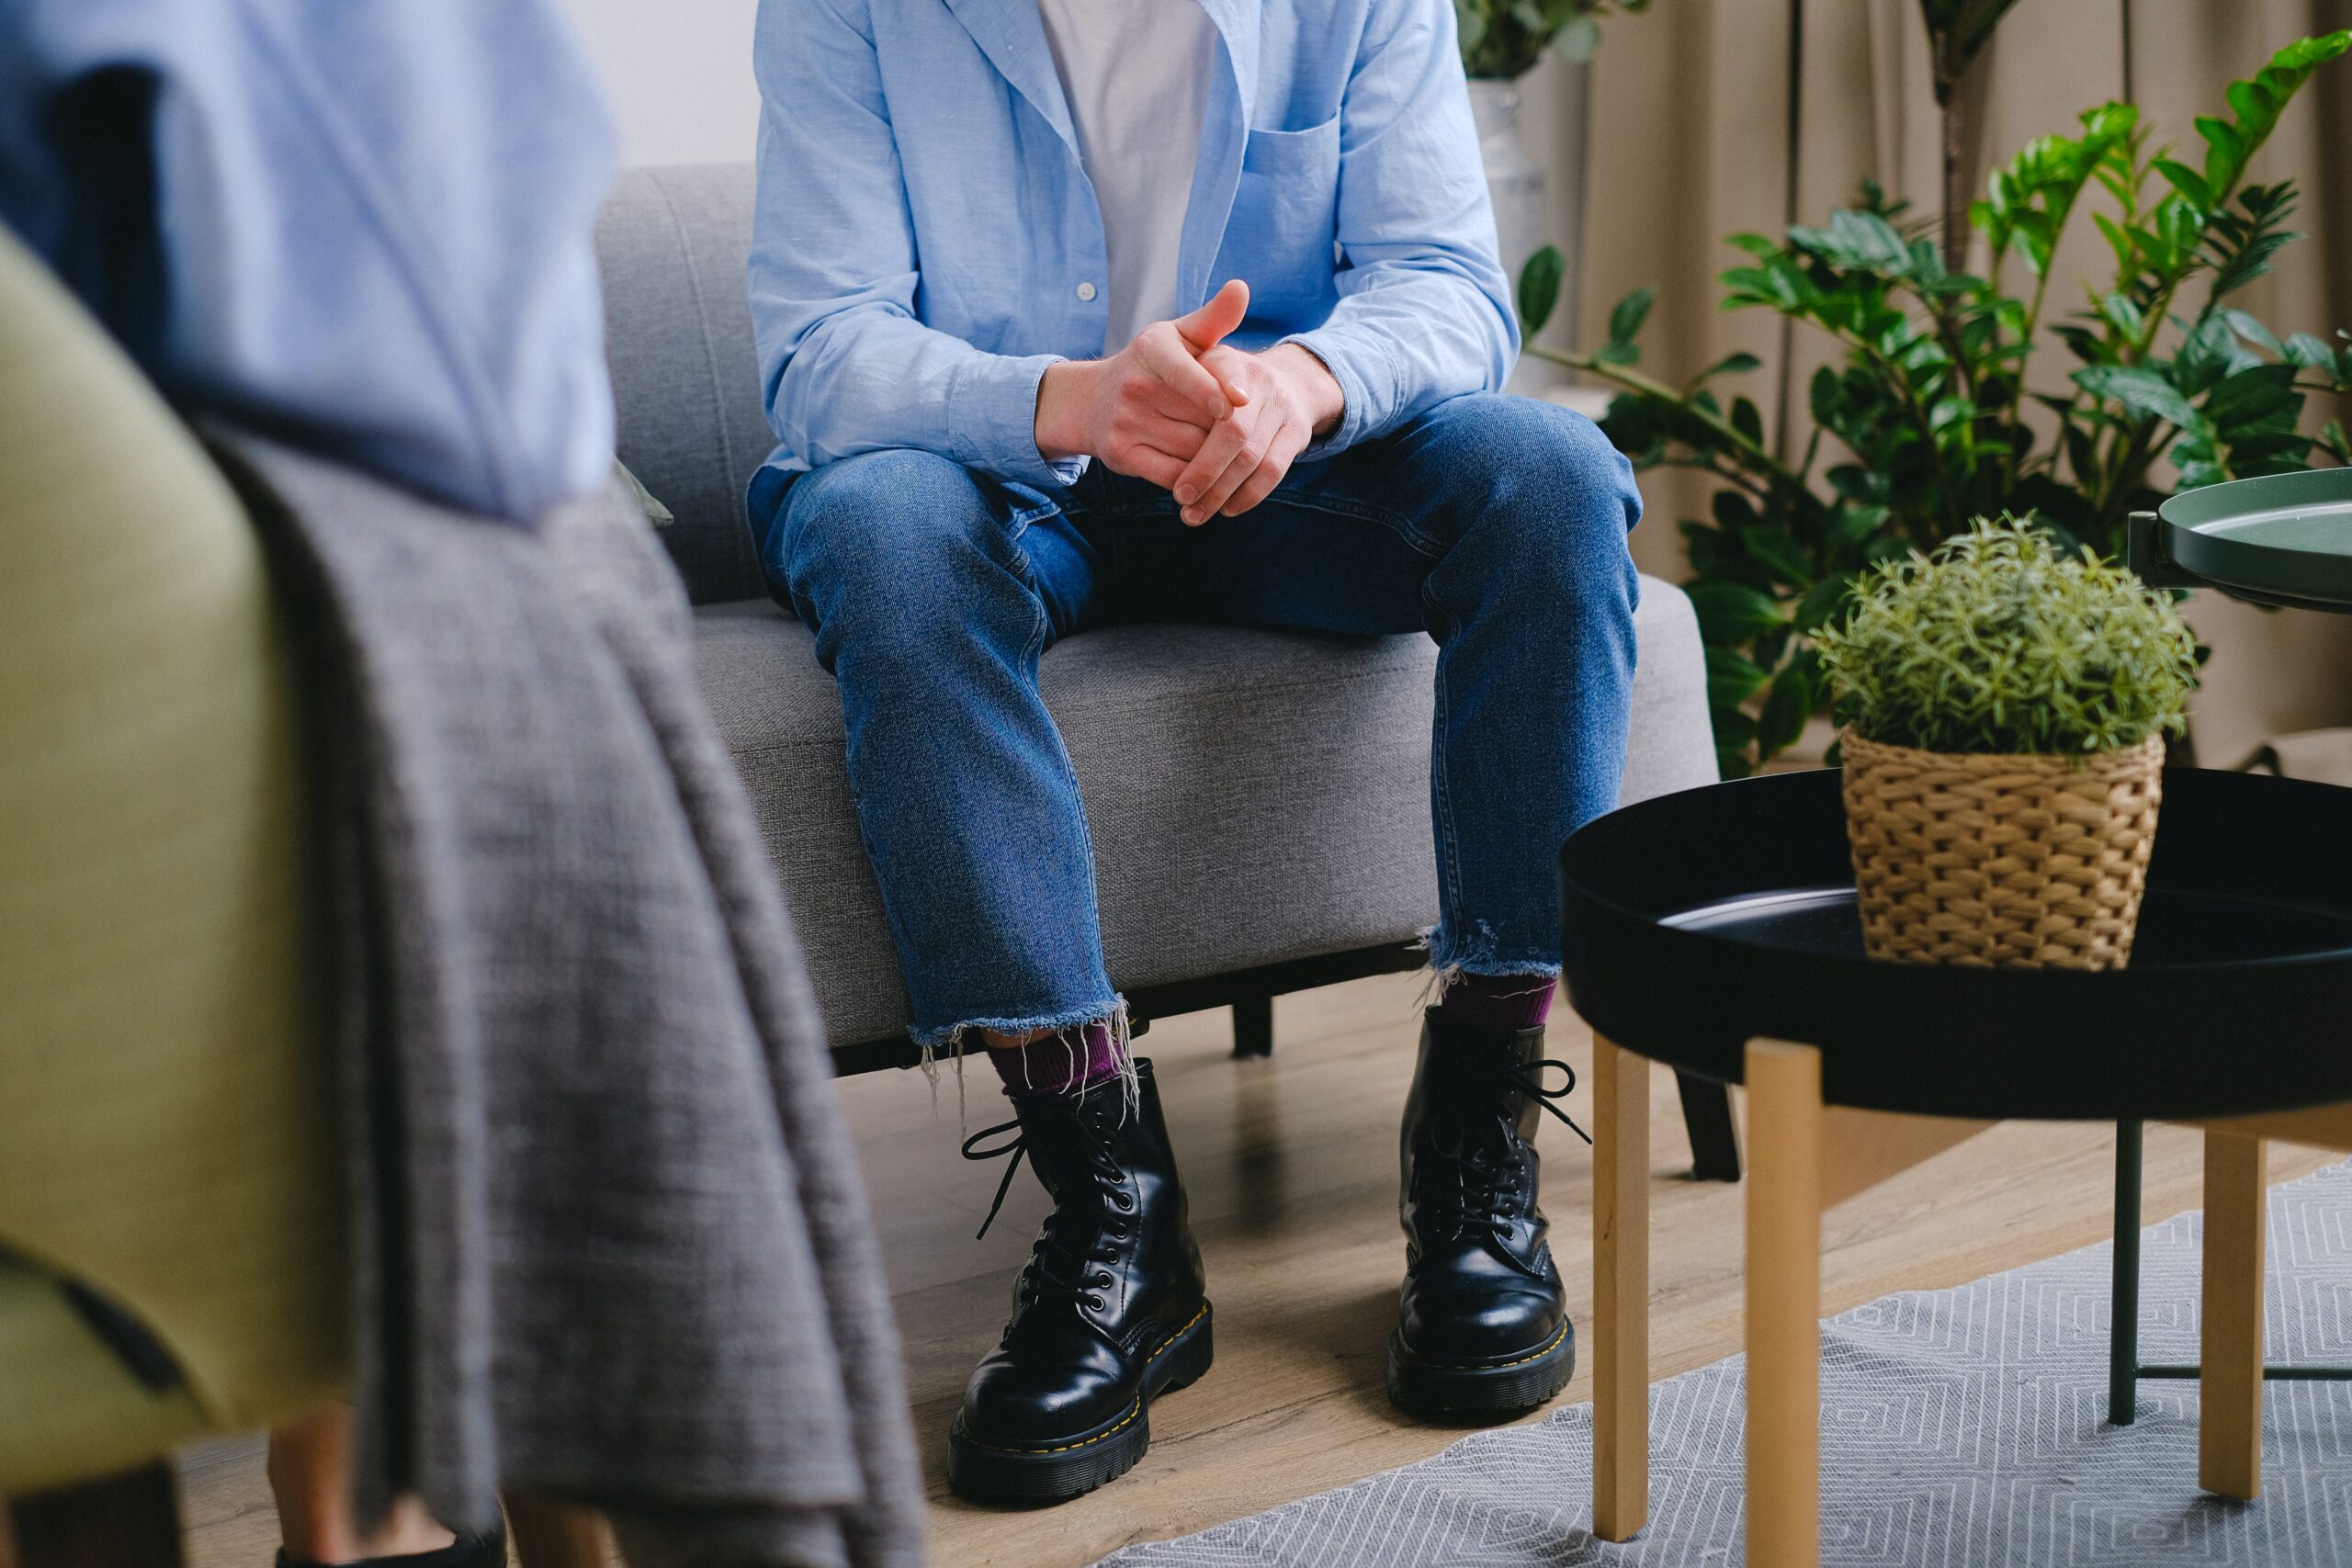 Client in blue shirt, sitting on a couch, in a Counselling session.